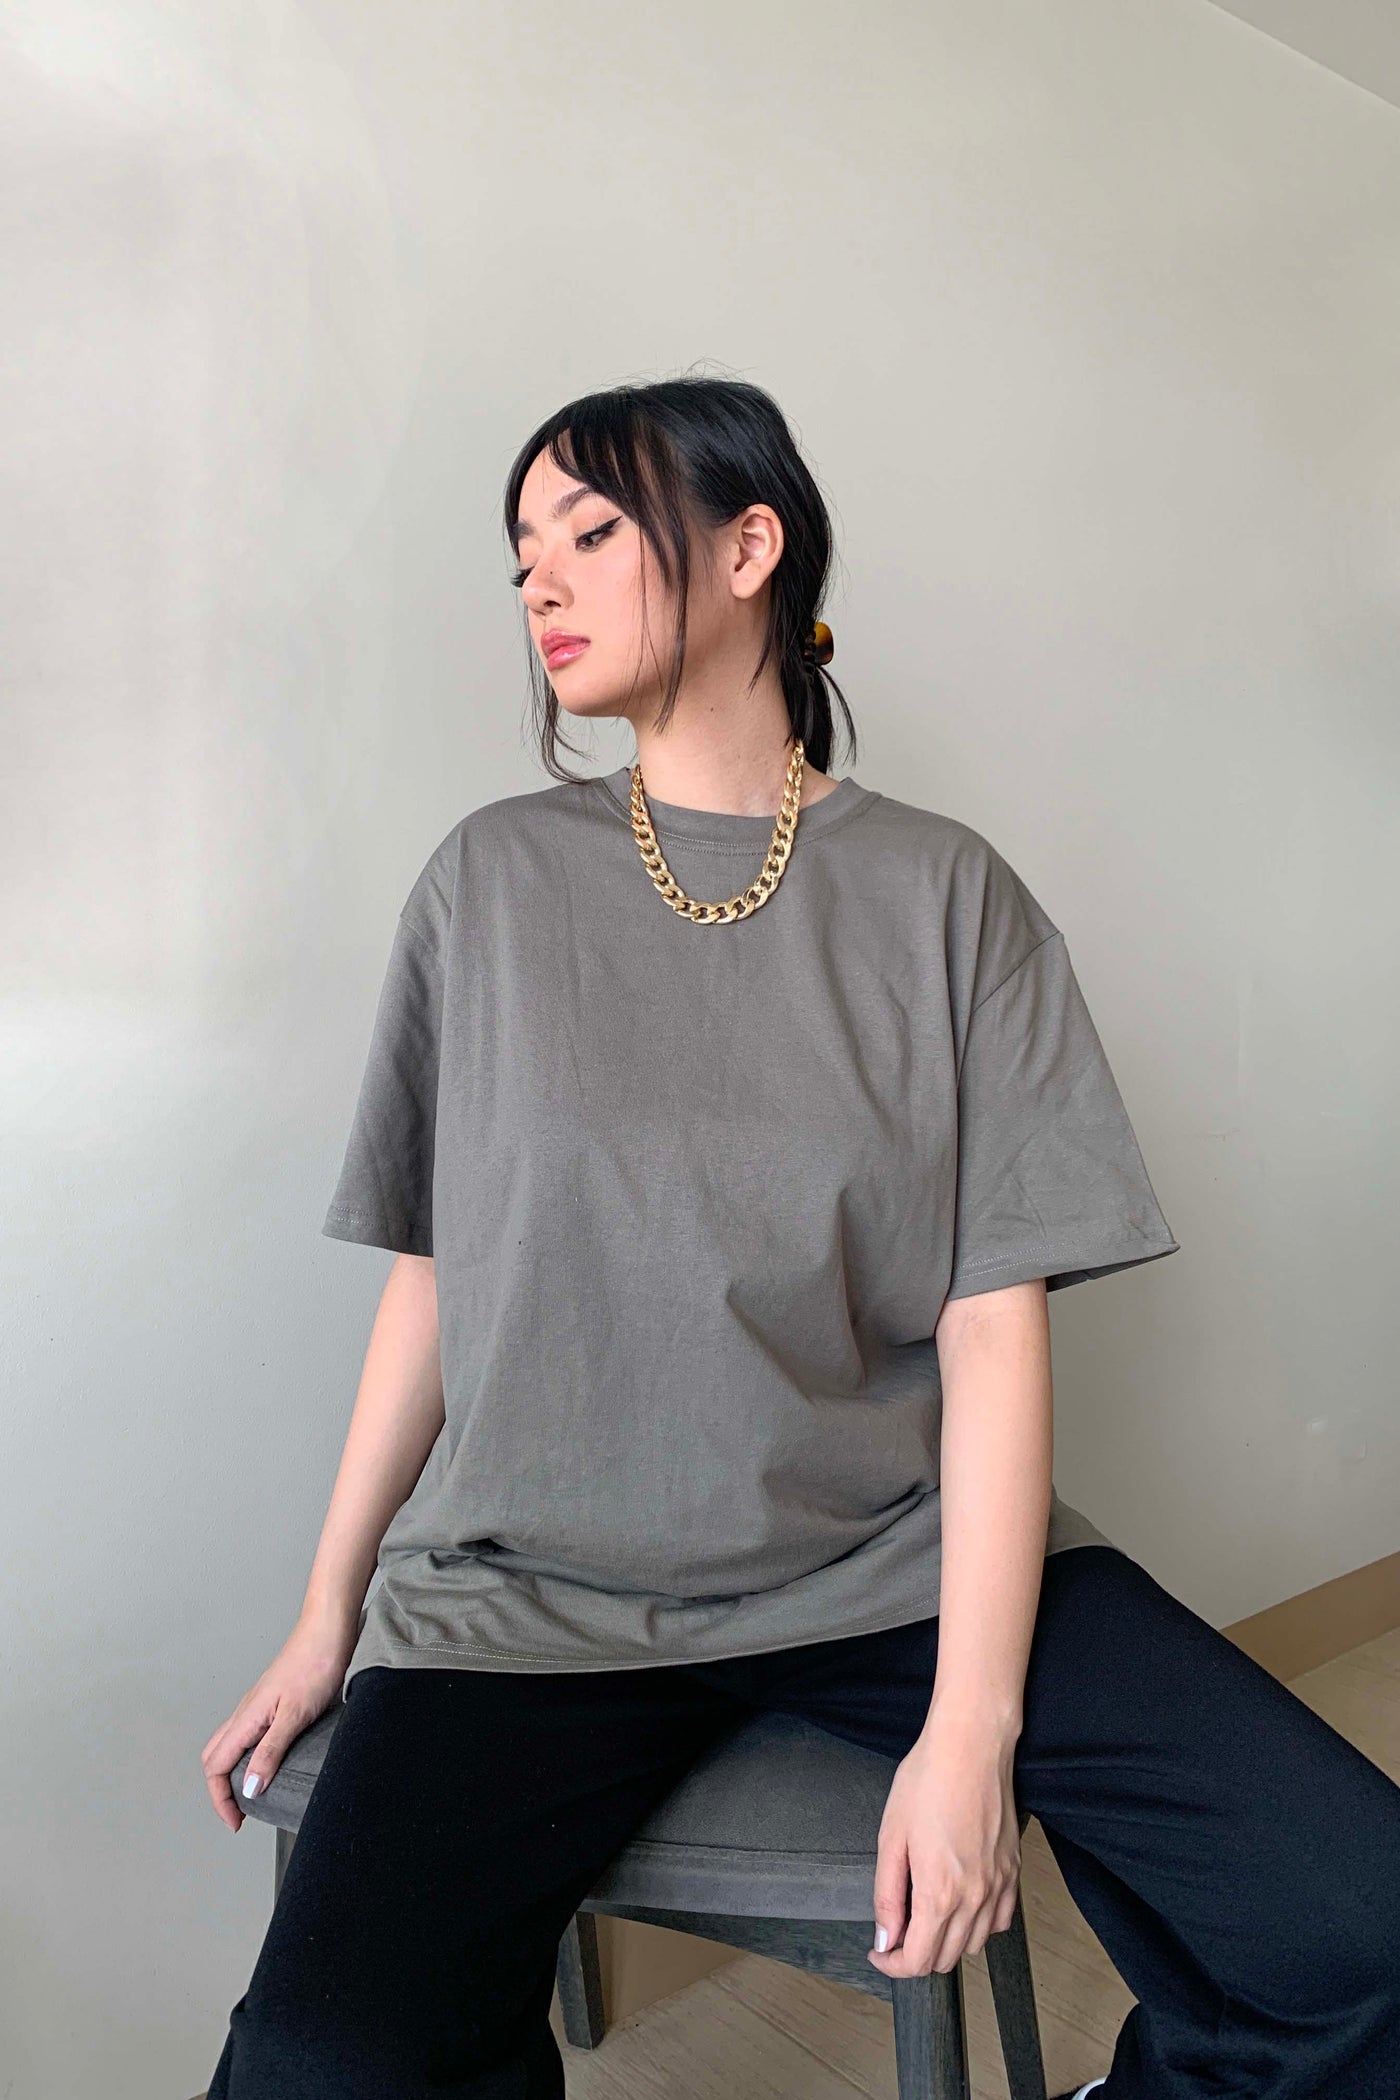 EVERYDAY Unisex Oversized Cotton T-Shirt in Hunter Green